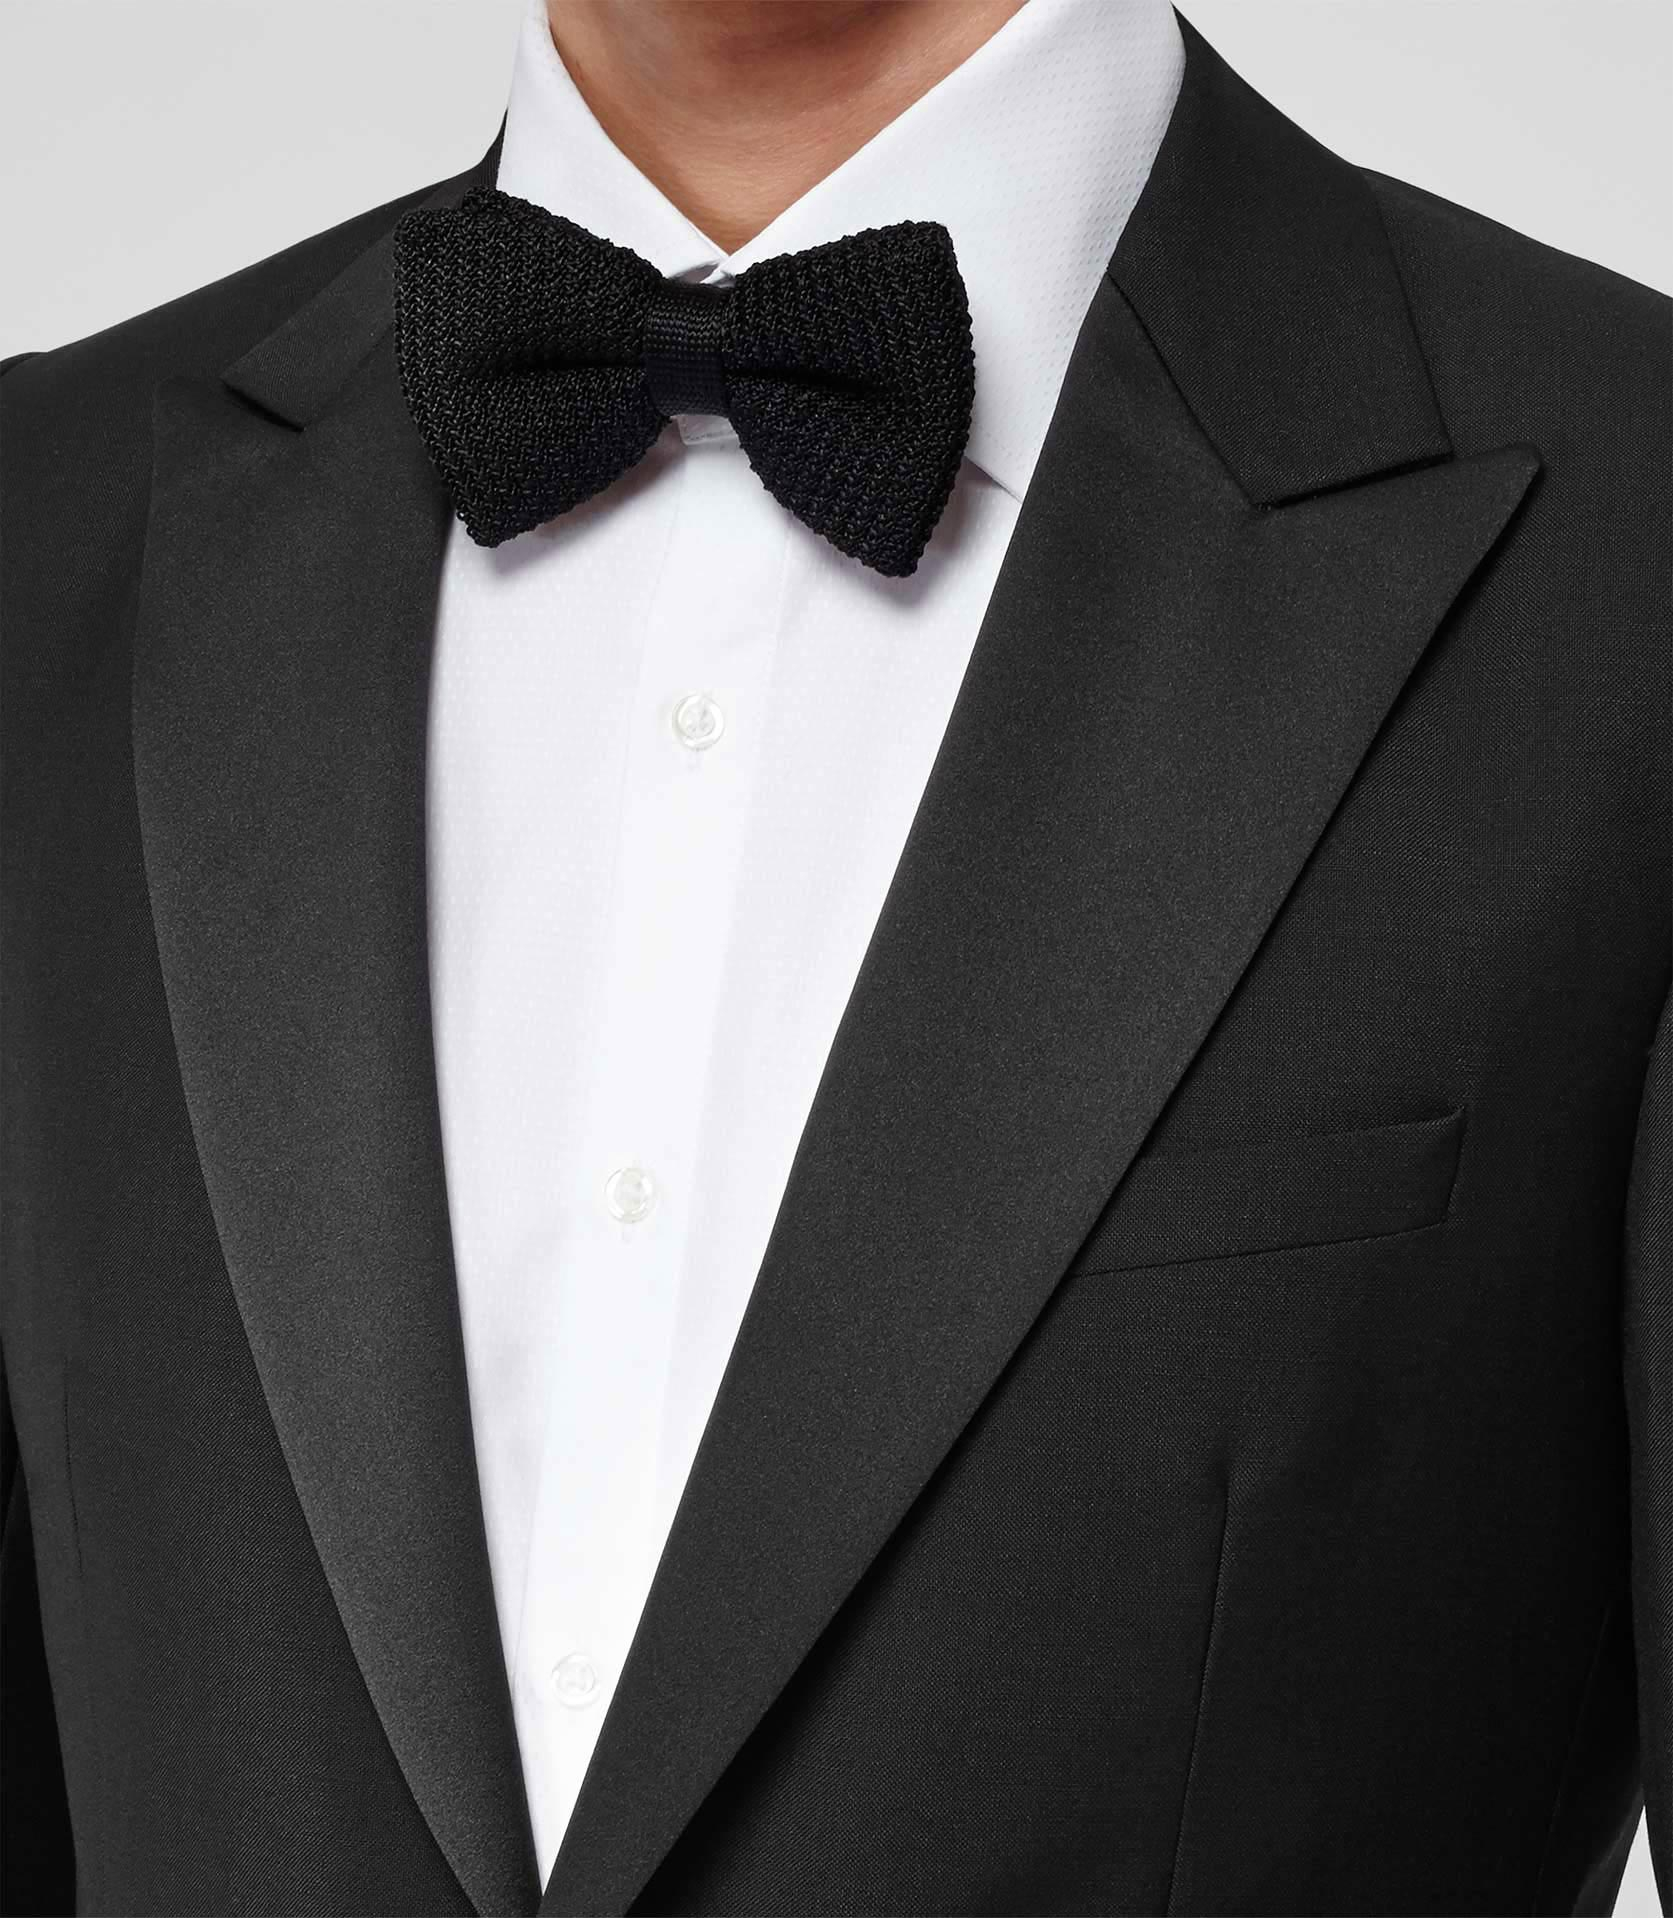 Top 90+ Pictures Pictures Of A Tuxedo Updated